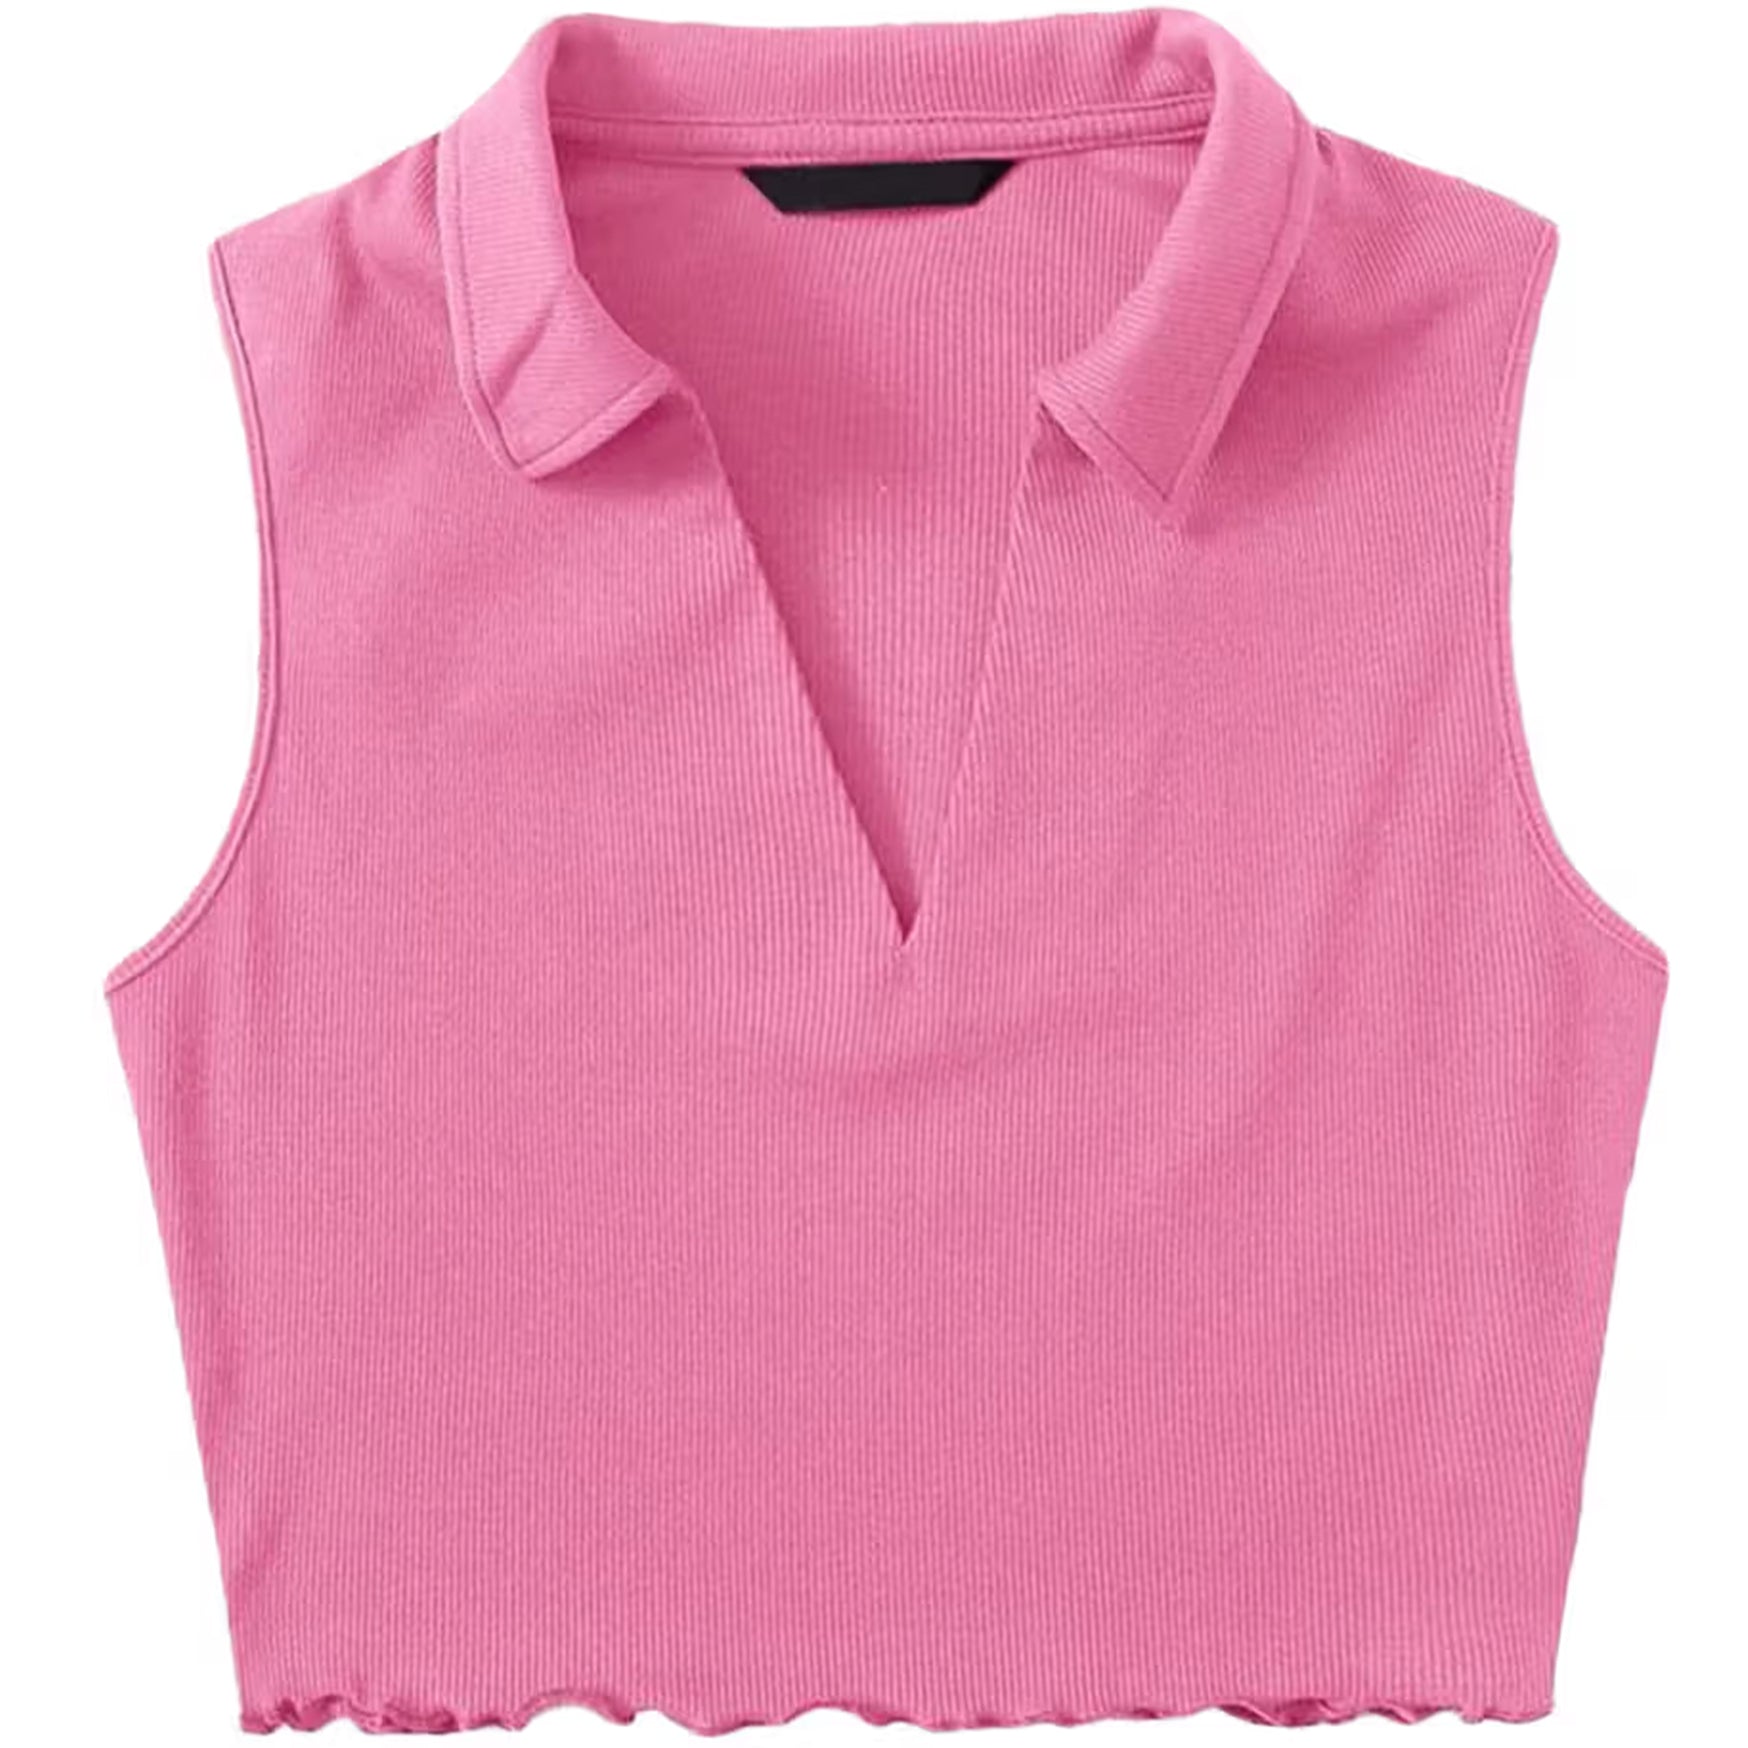 Khhalisi Pink Tank Cami Top for Womens (L)